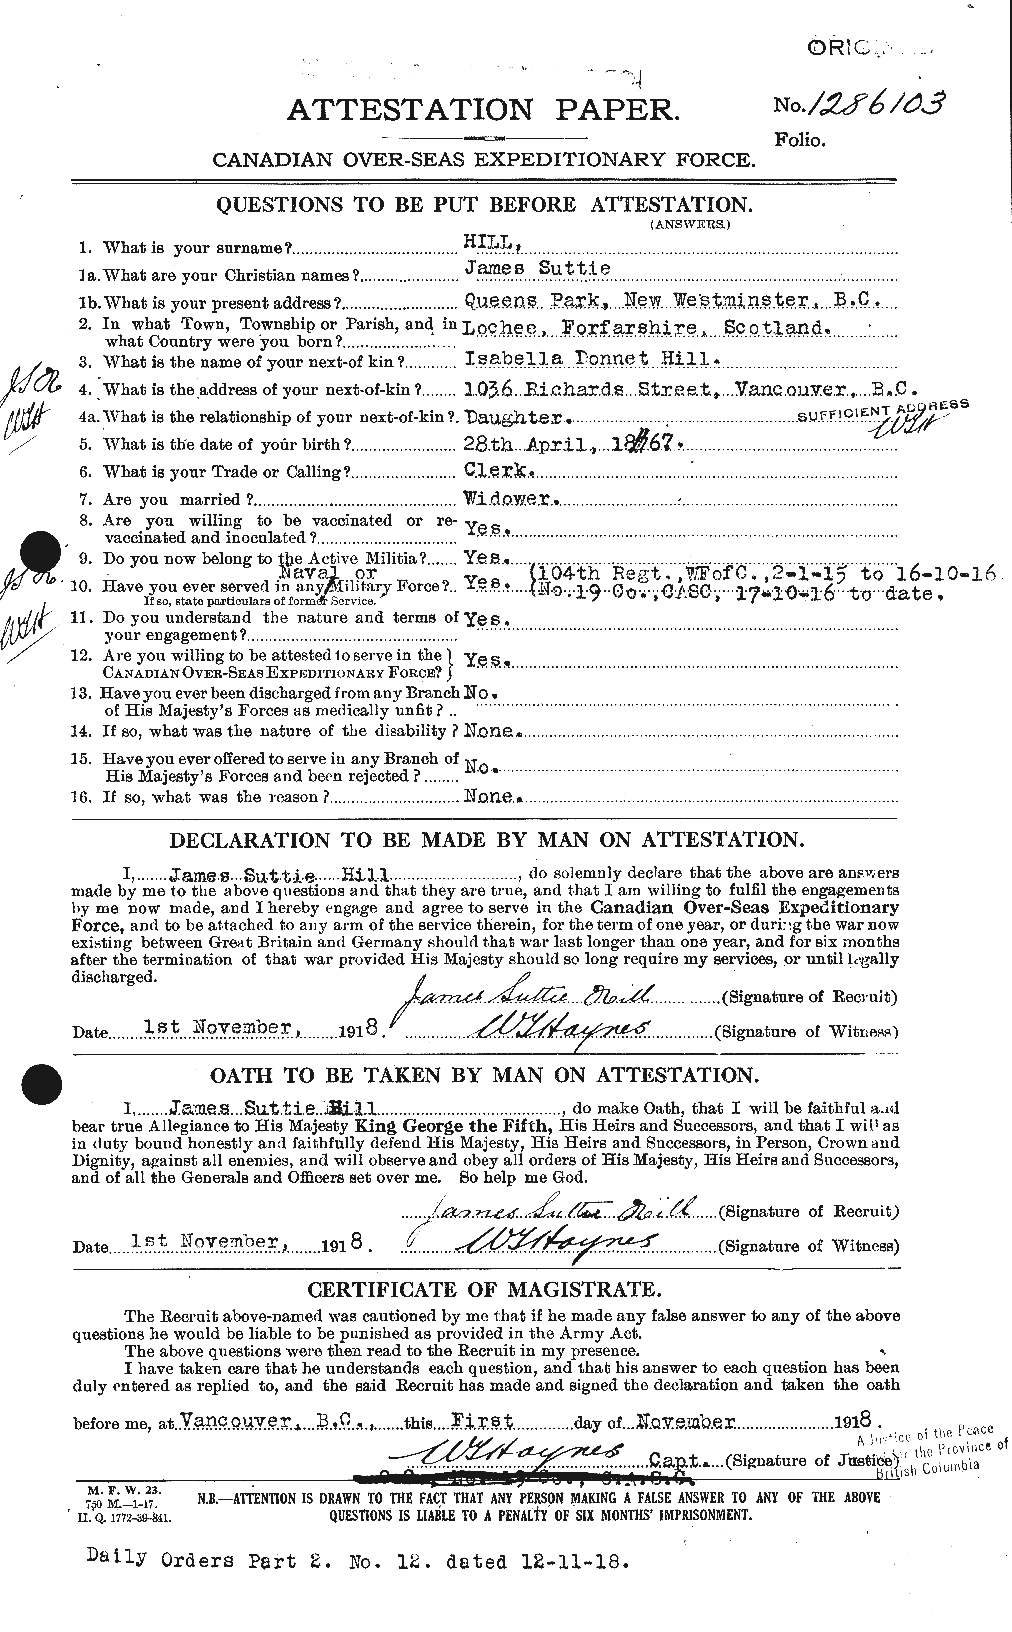 Personnel Records of the First World War - CEF 398704a